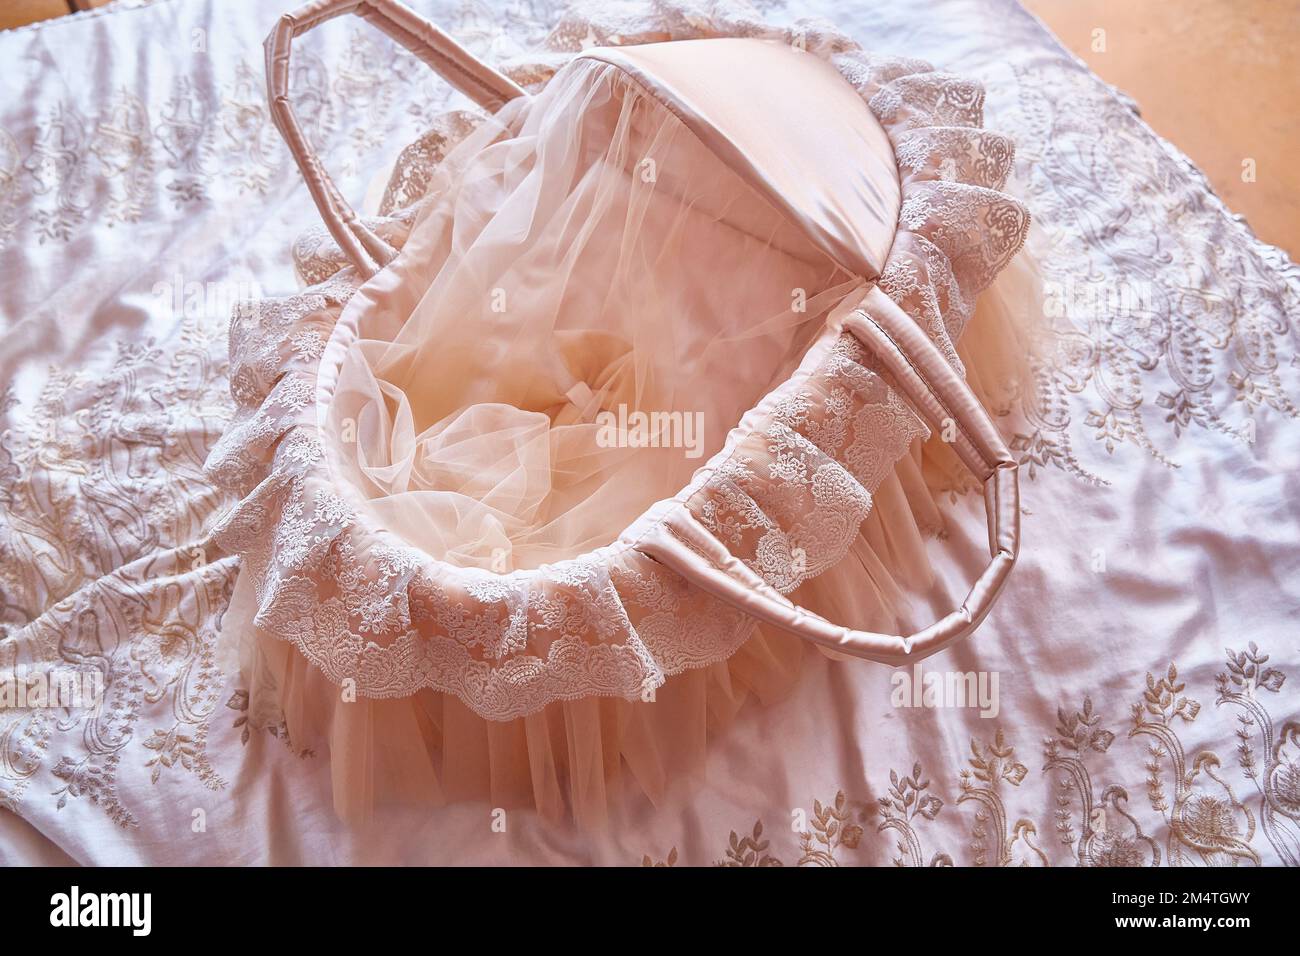 Beautiful carrycot or cradle with lace and ribbons for a newborn baby Stock Photo